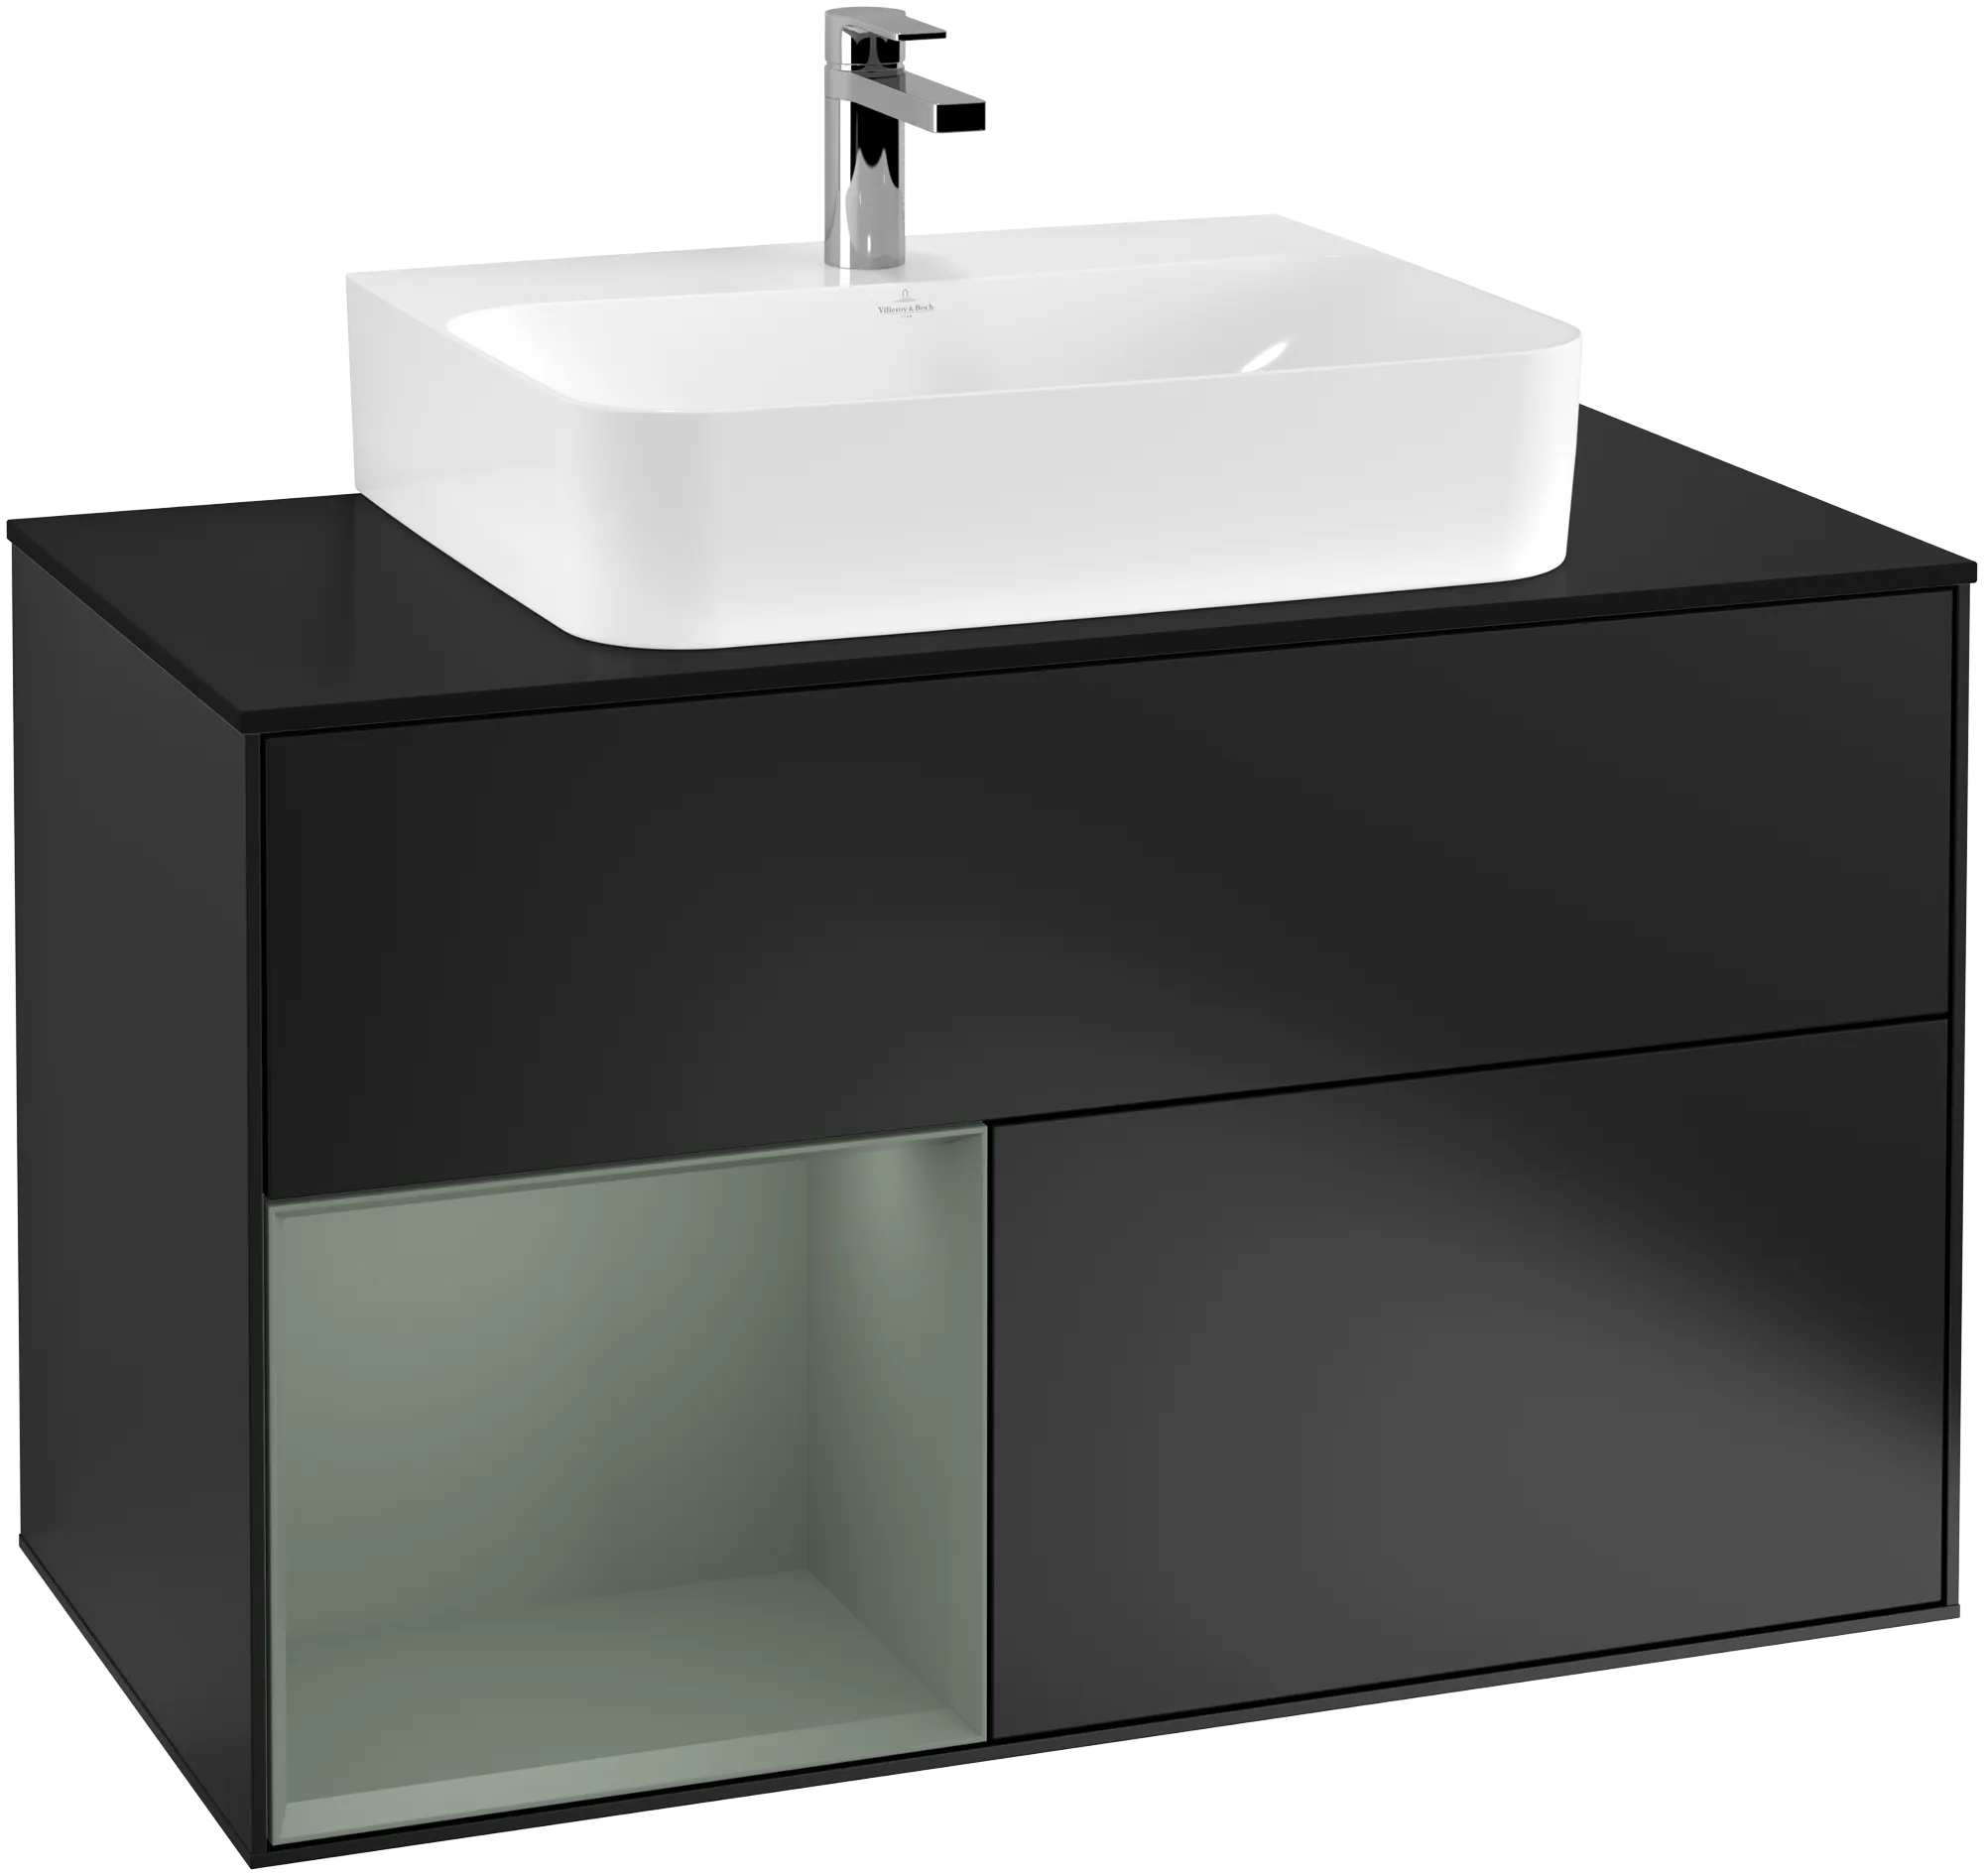 Picture of VILLEROY BOCH Finion Vanity unit, with lighting, 2 pull-out compartments, 1000 x 603 x 501 mm, Black Matt Lacquer / Olive Matt Lacquer / Glass Black Matt #G112GMPD